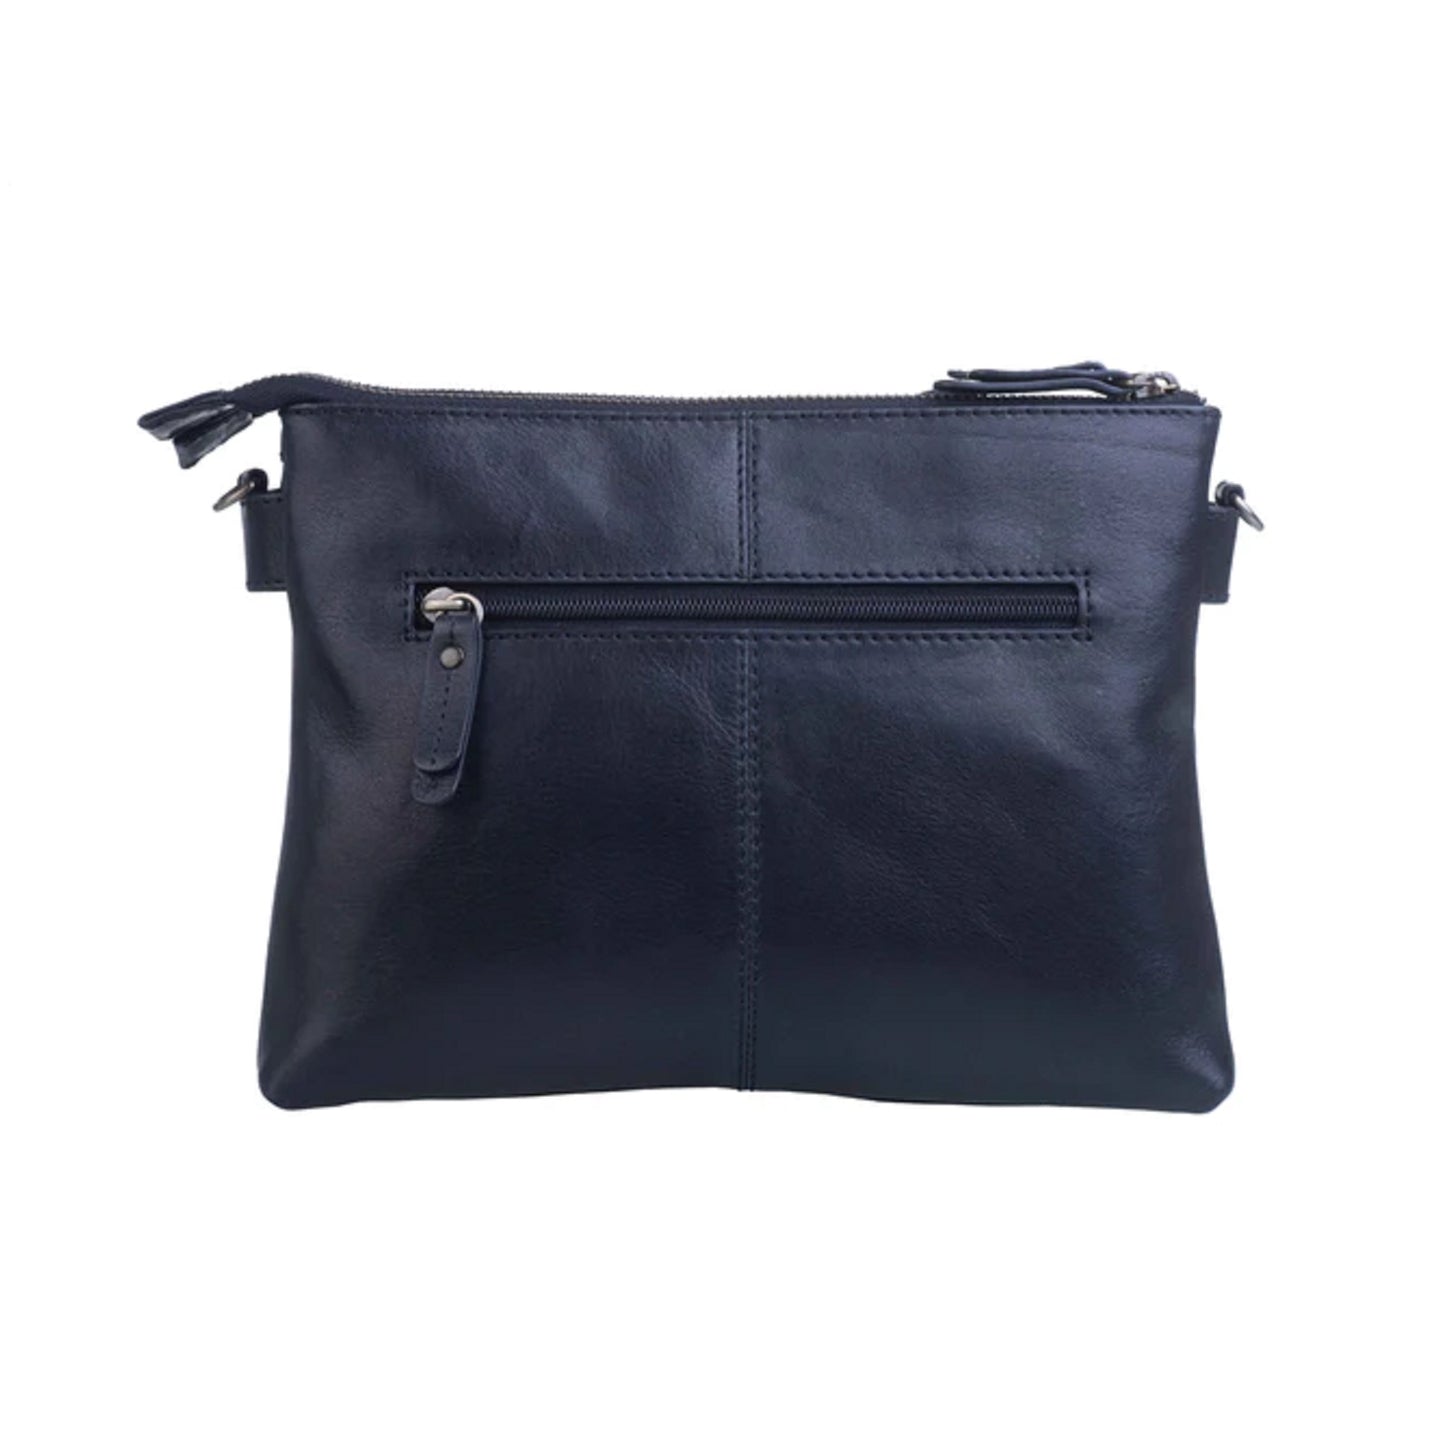 Steed Double Pocket Leather Bag - Black